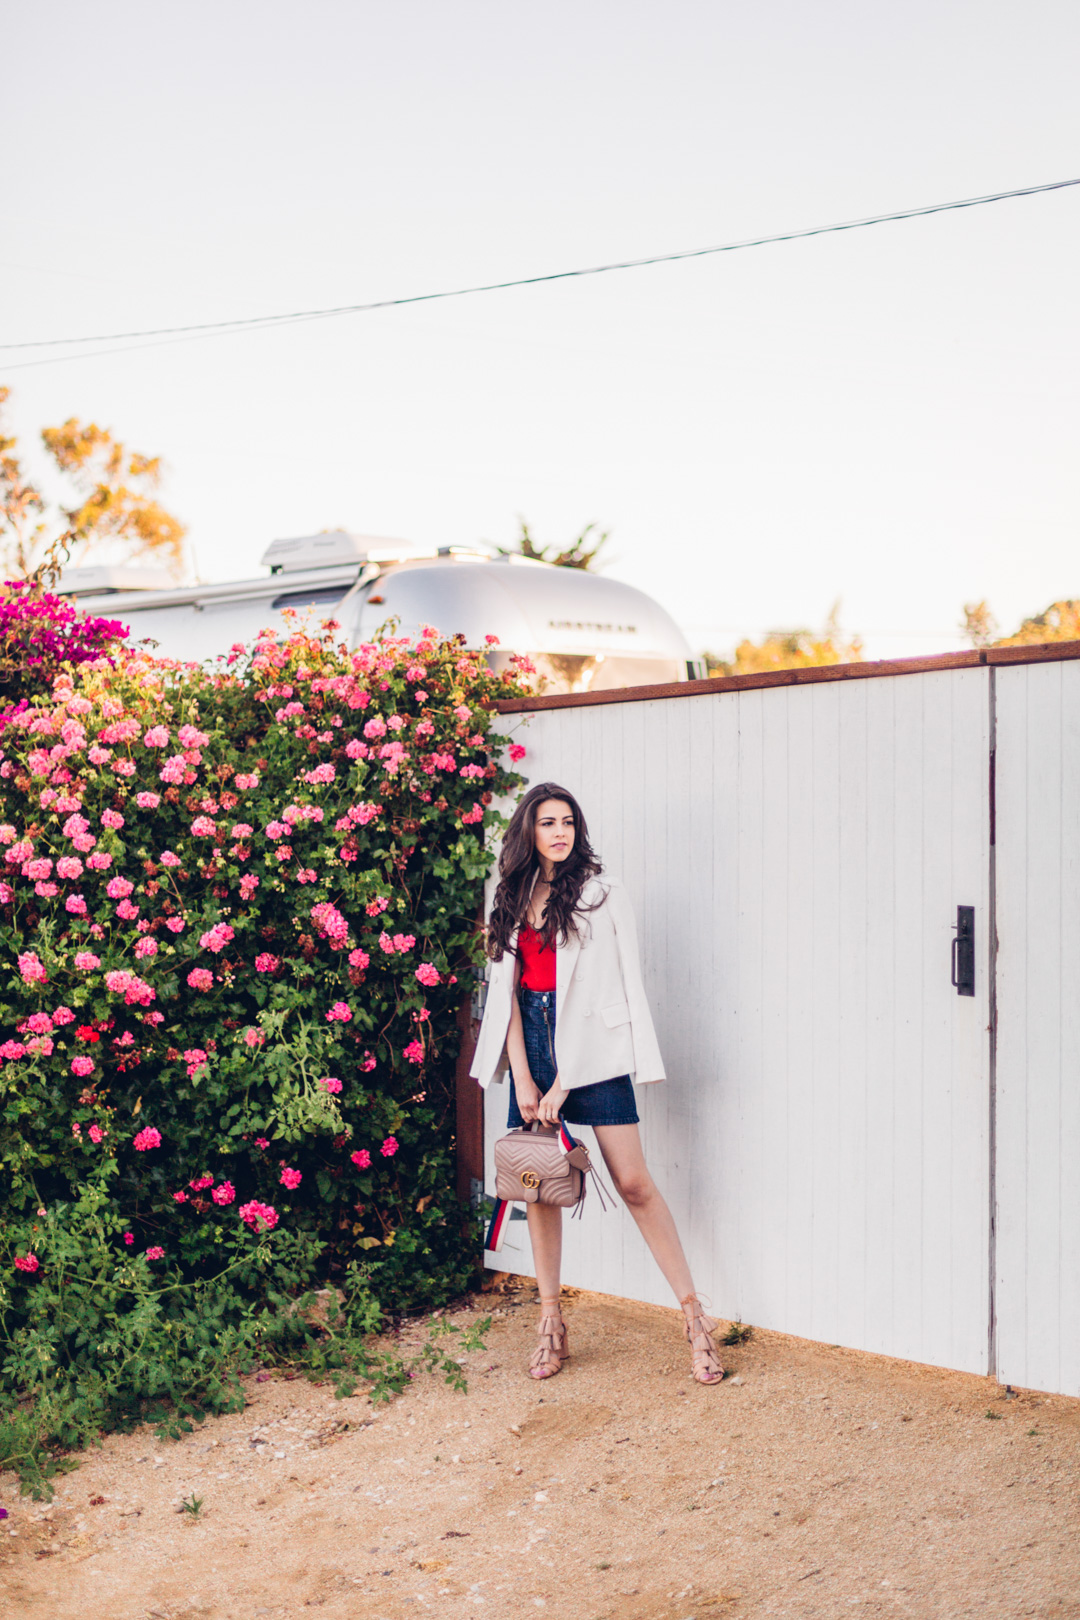 Jackie Roque styling a red, white and blue outfit with the Gucci GG Marmont Shoulder Bag in Malibu, california.